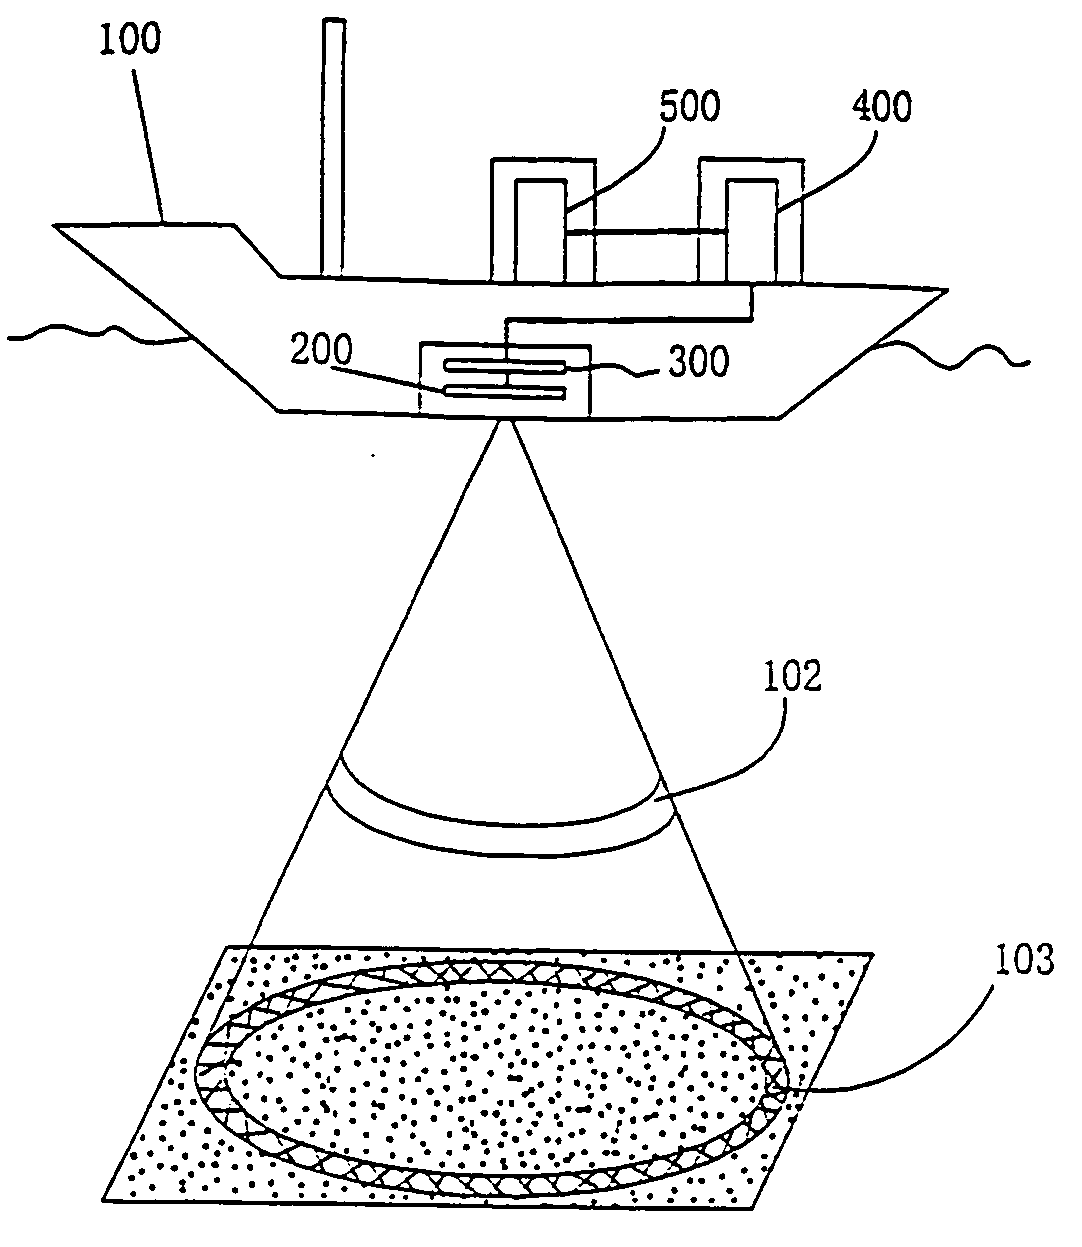 Method and system for measuring the velocity of a vessel relative to the bottom using velocity measuring correlation sonar